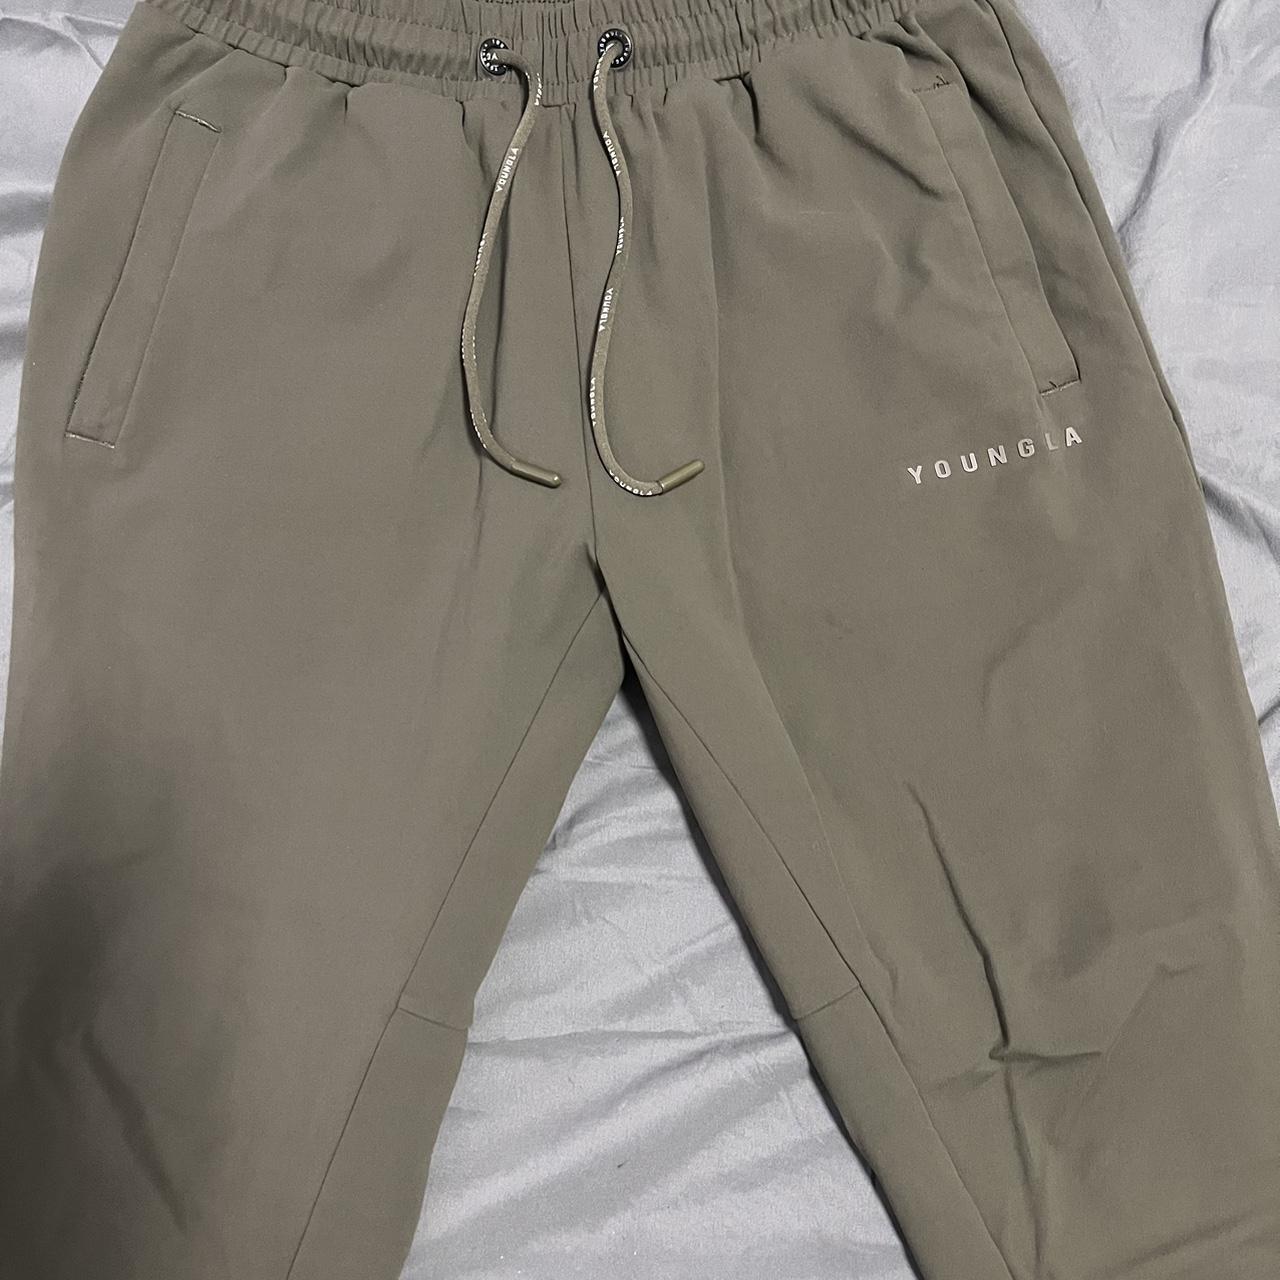 Youngla fitted track pants Medium olive green - Depop